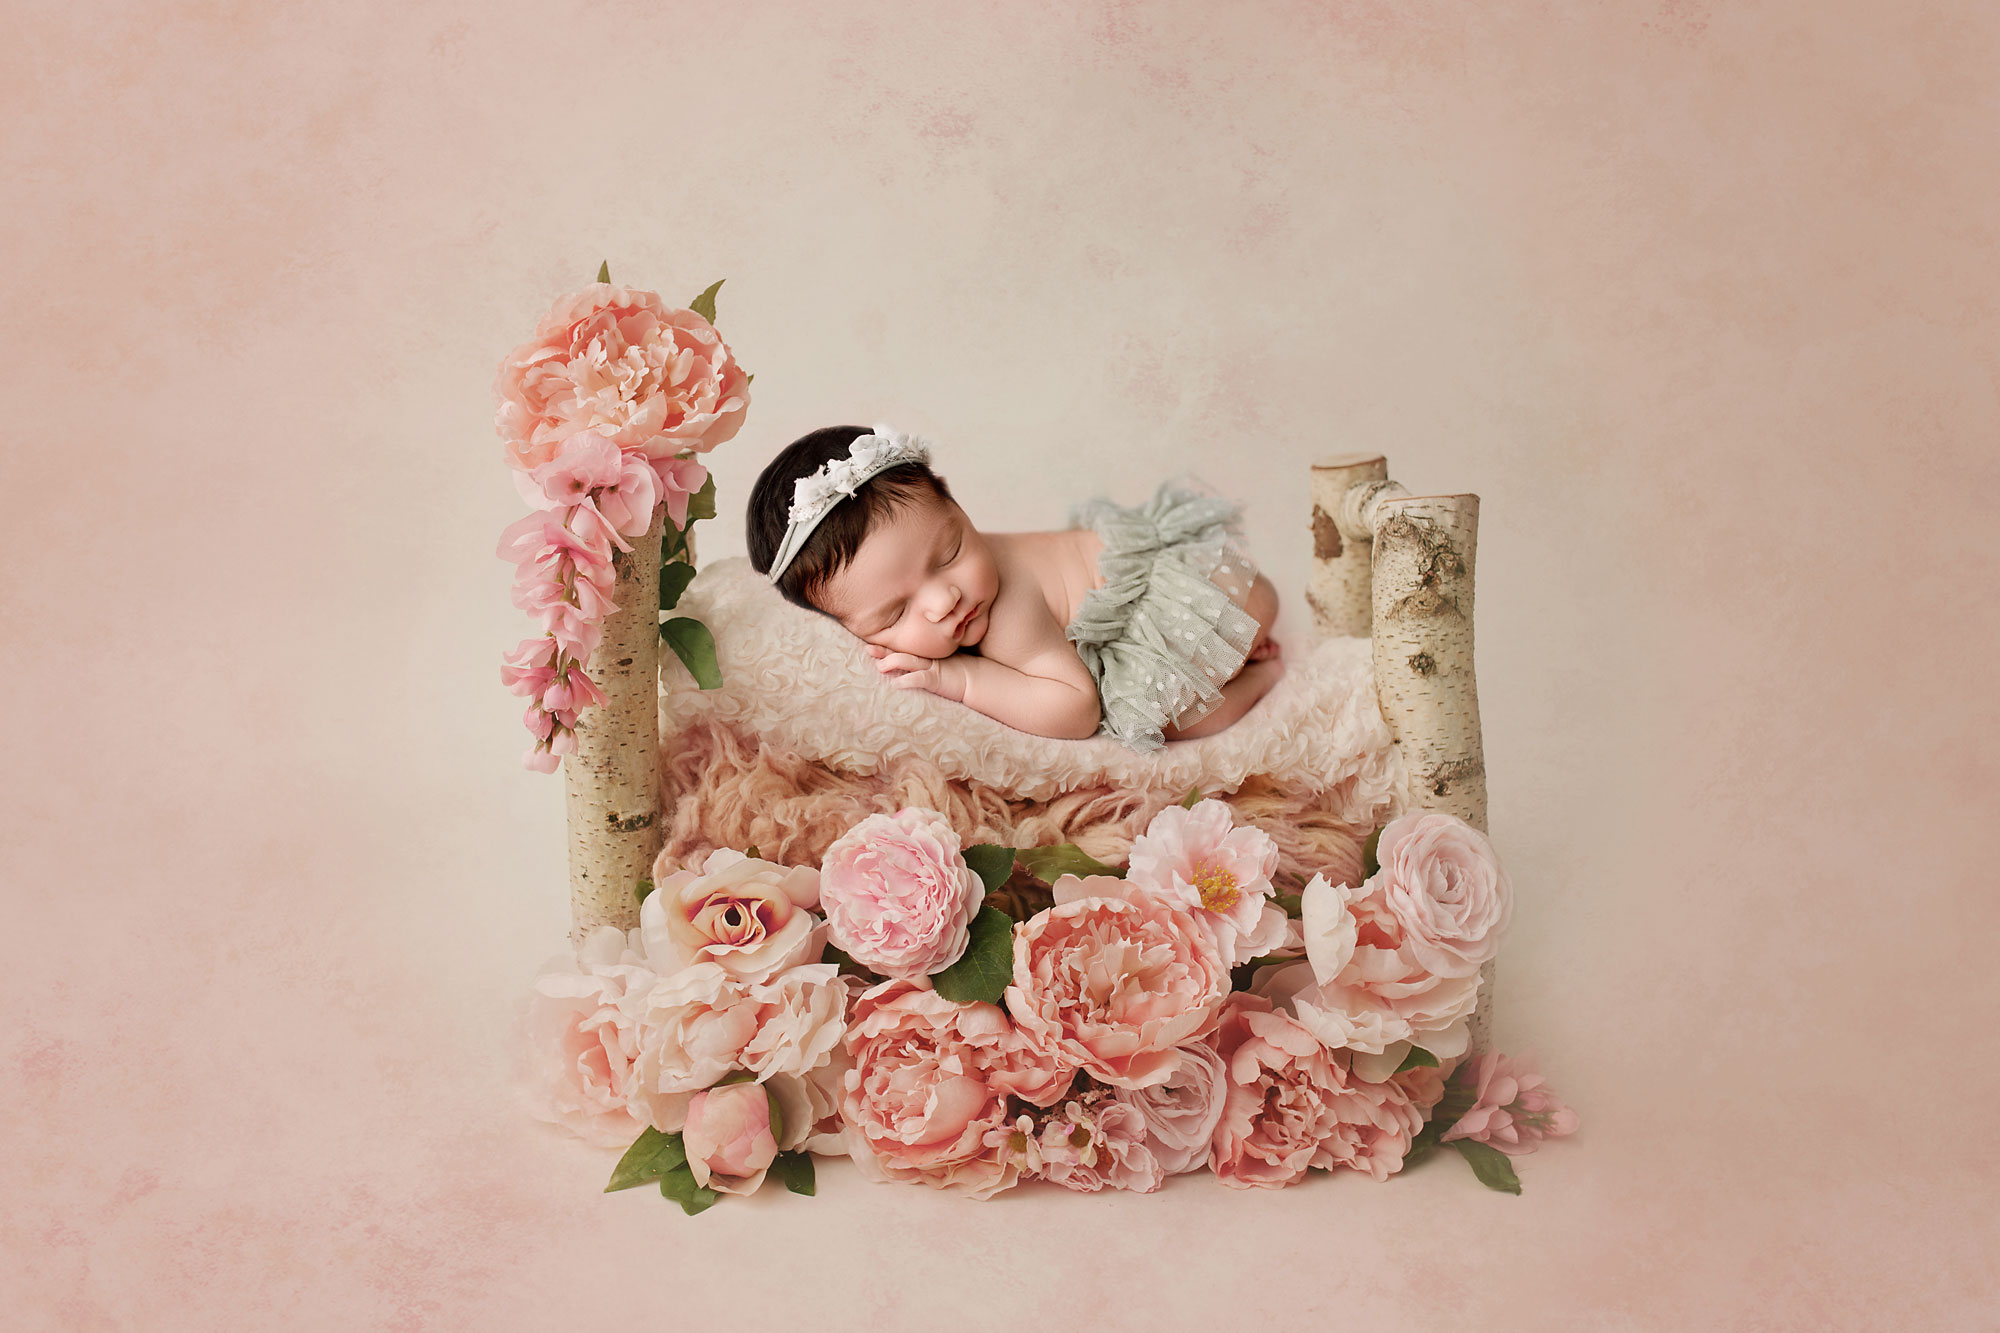 floral bed pink flowers and baby girl in a tutu sleeping on the bed